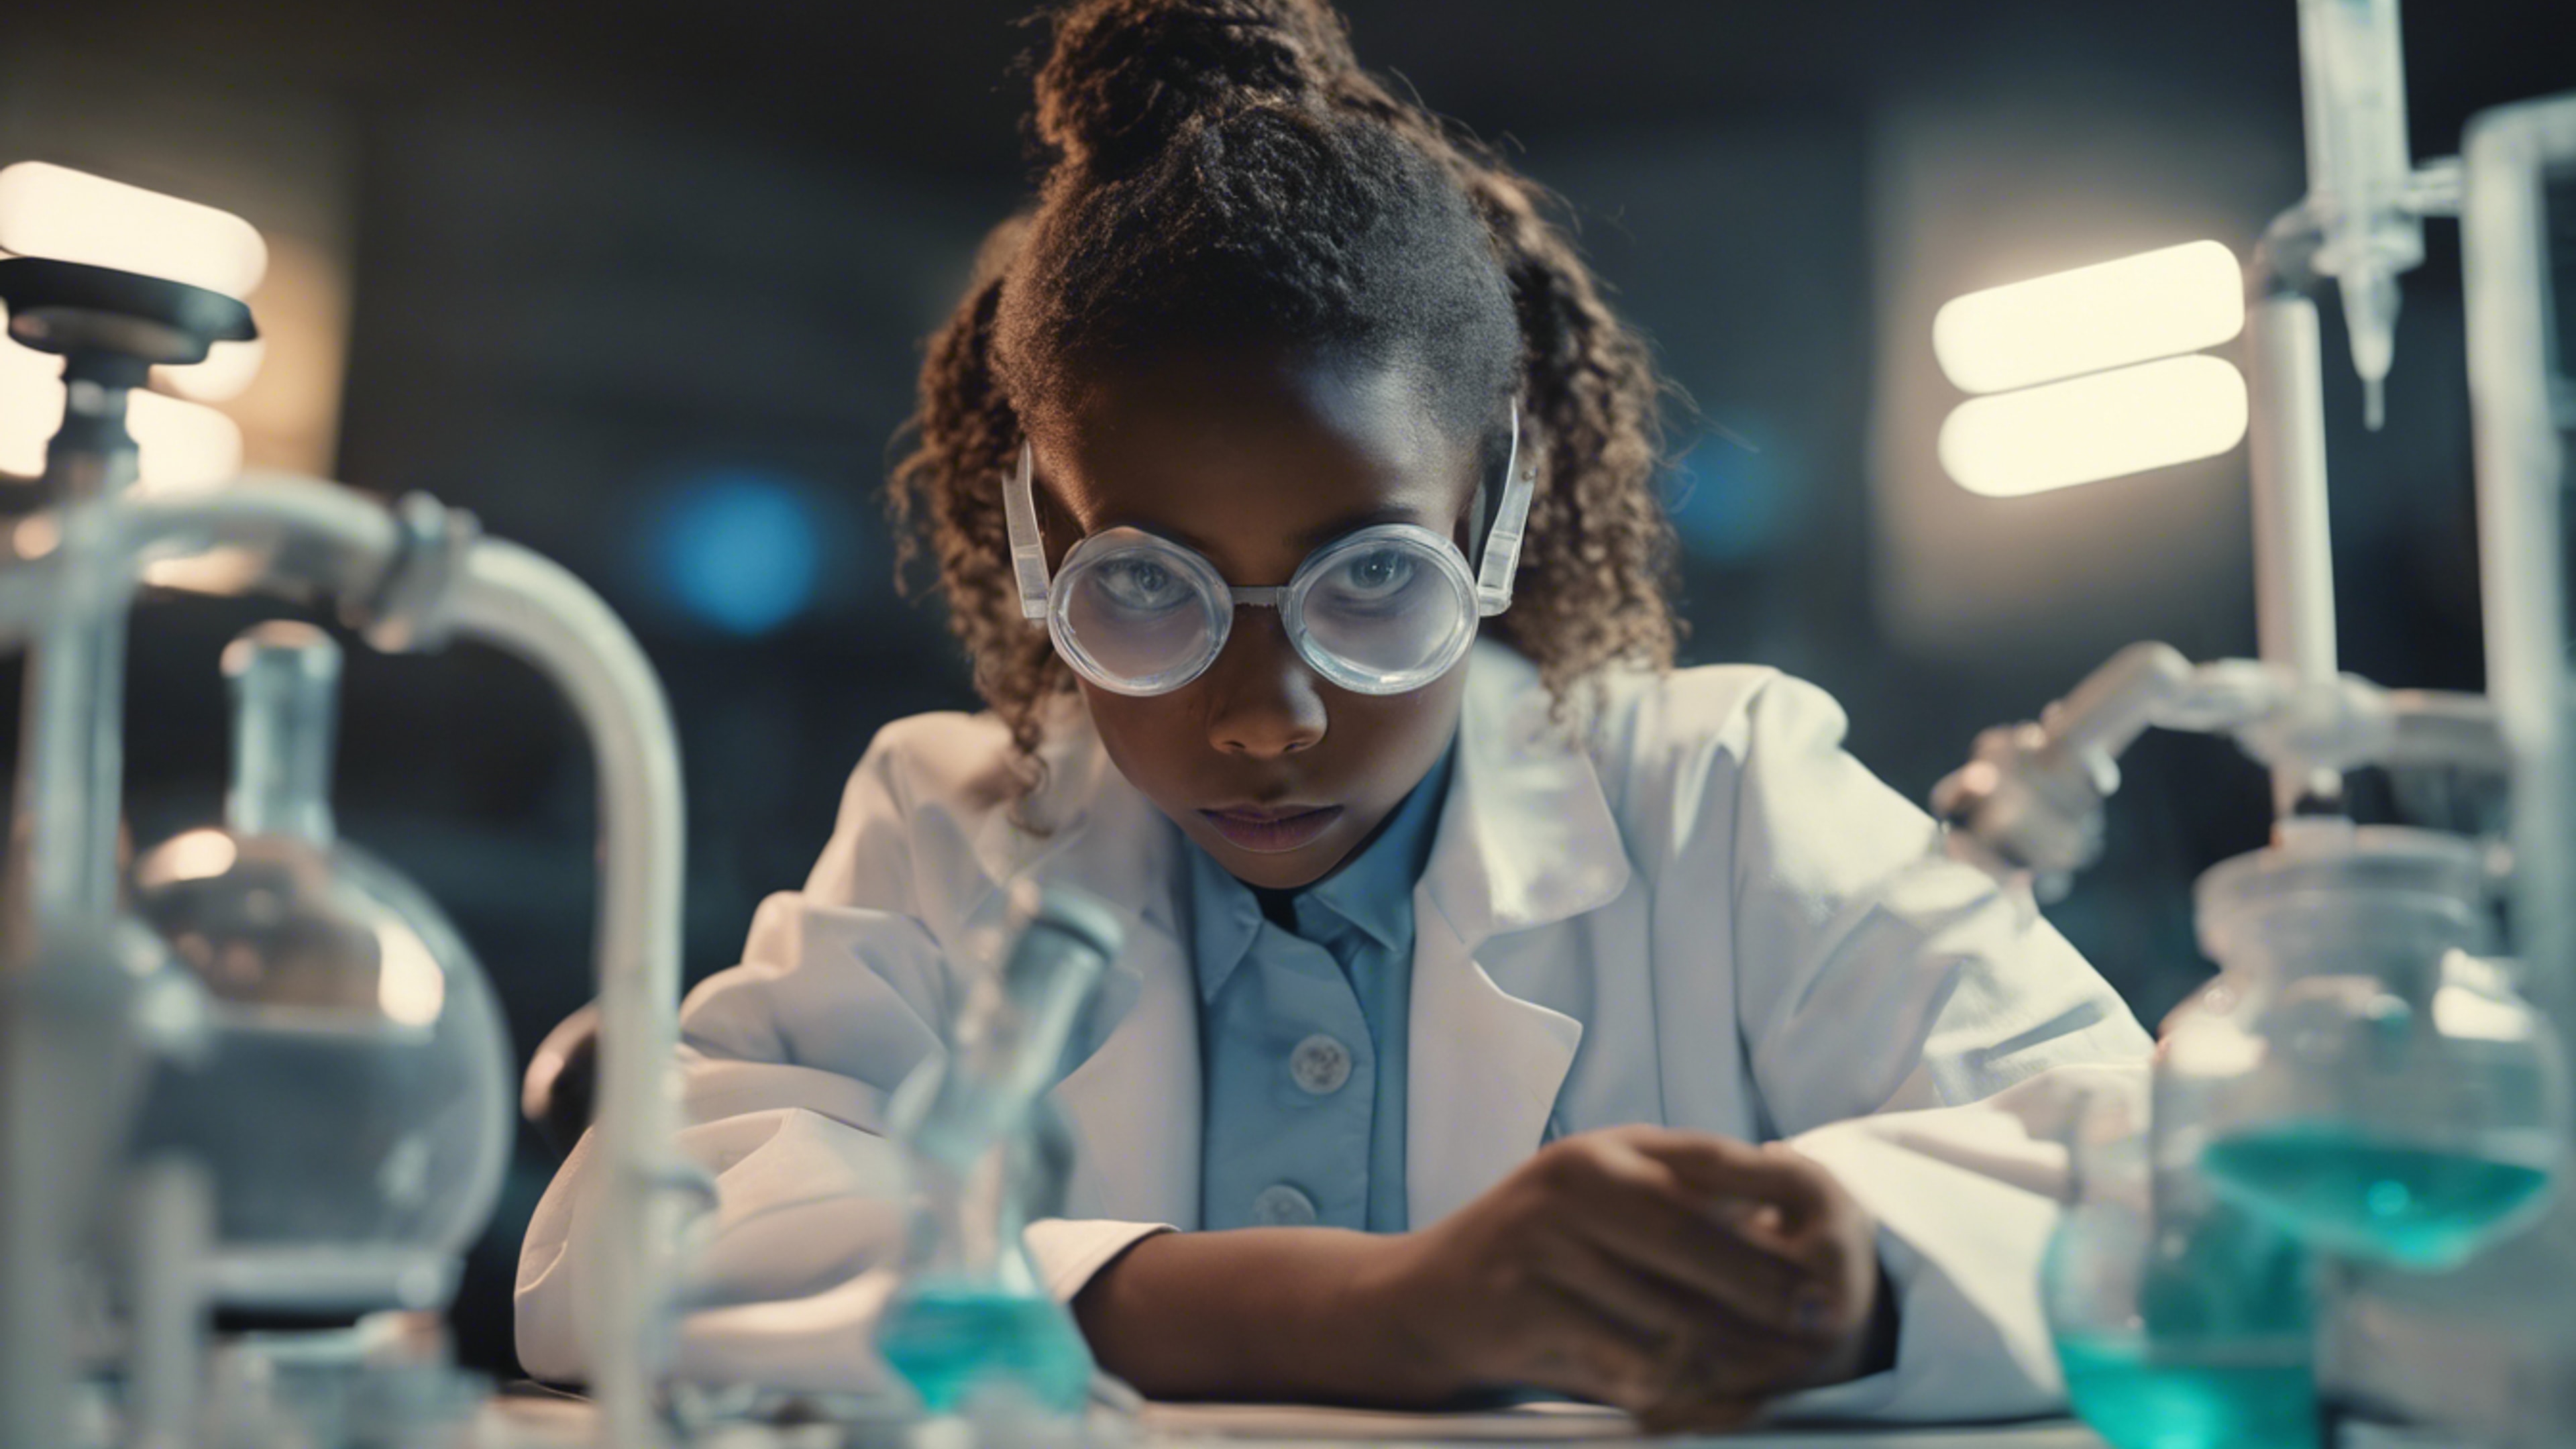 A young black girl wearing goggles and lab coat immersed in doing science experiment. Tapéta[448c919503a247f79693]